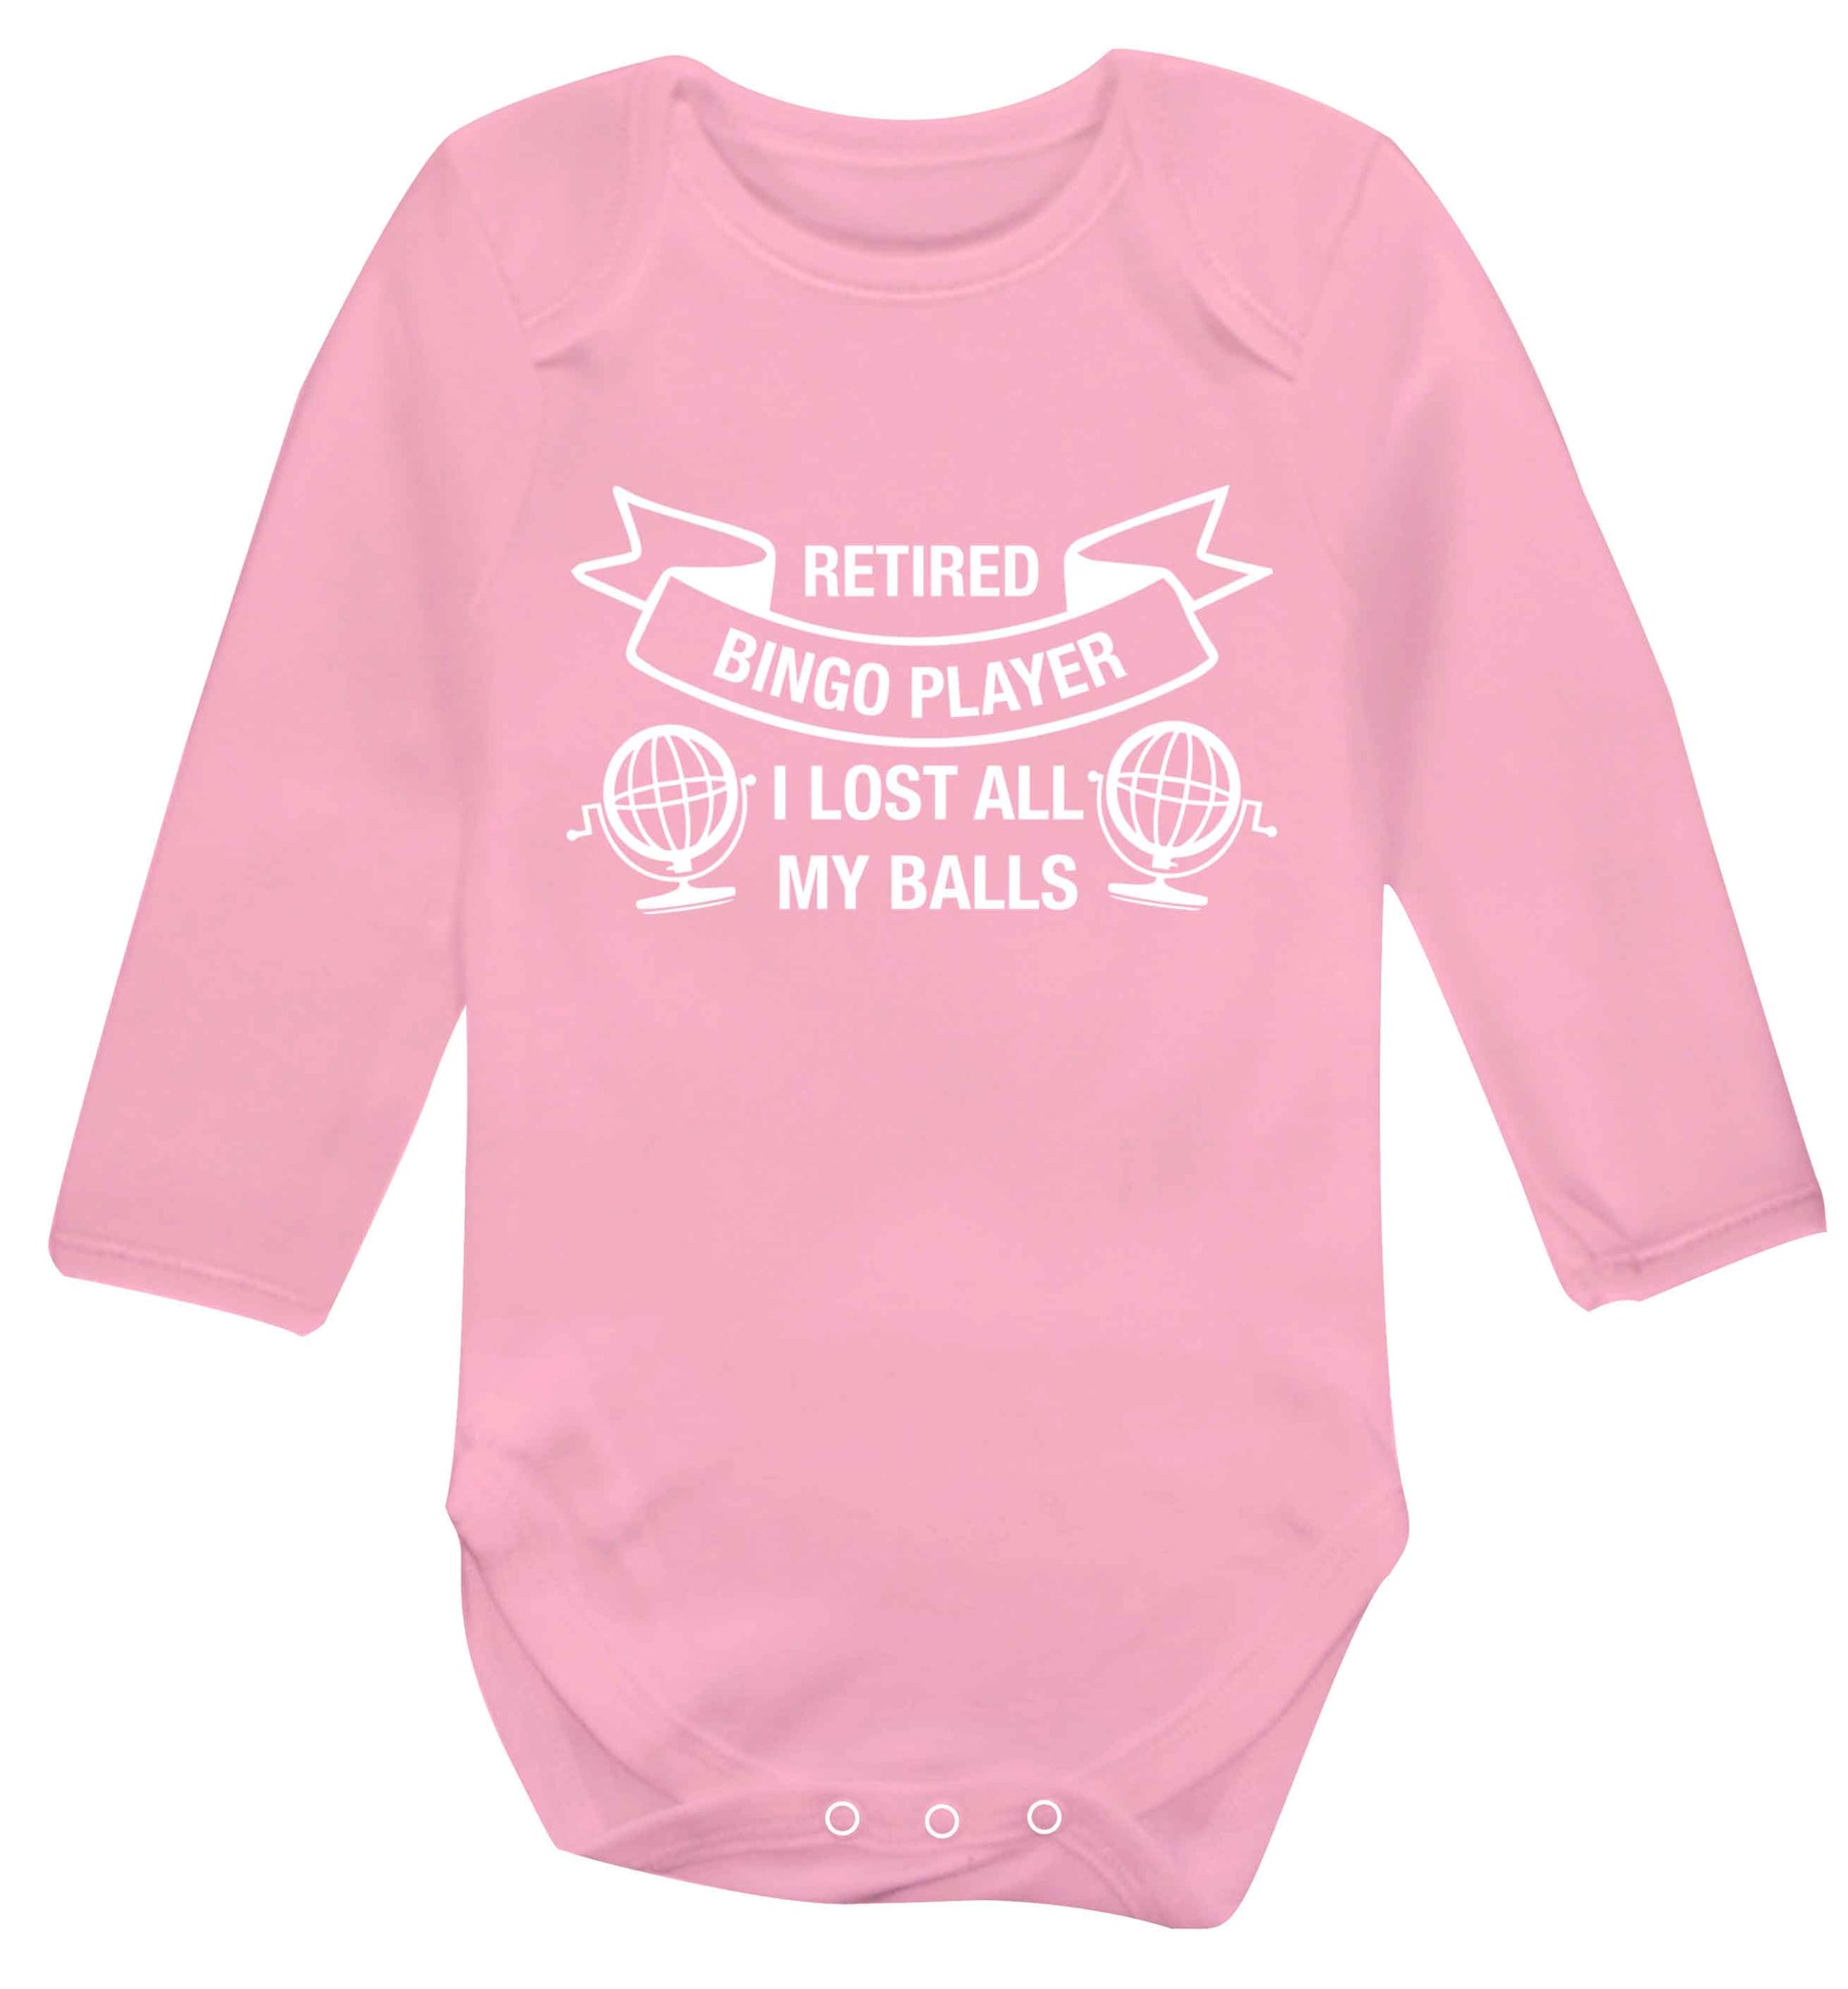 Retired bingo player I lost all my balls Baby Vest long sleeved pale pink 6-12 months